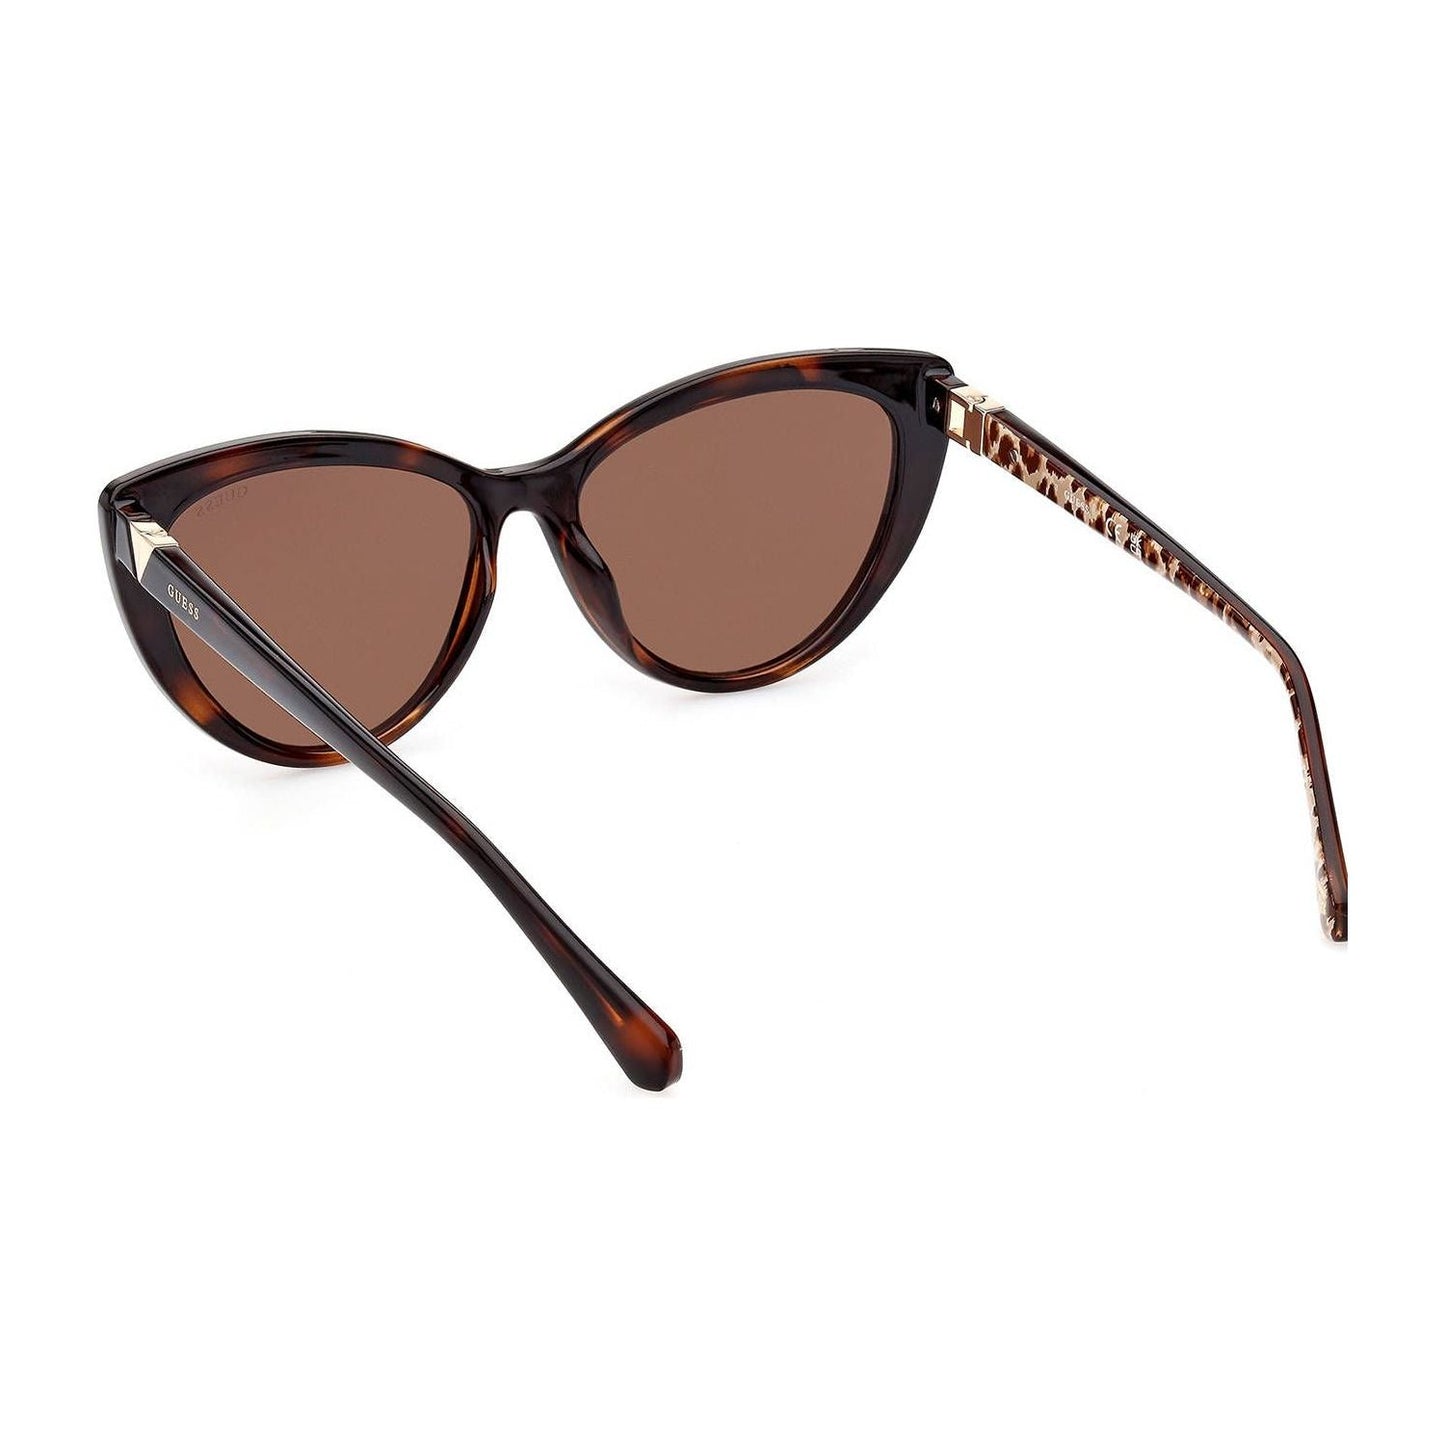 Guess Jeans Chic Teardrop Brown Lens Sunglasses chic-teardrop-brown-lens-sunglasses